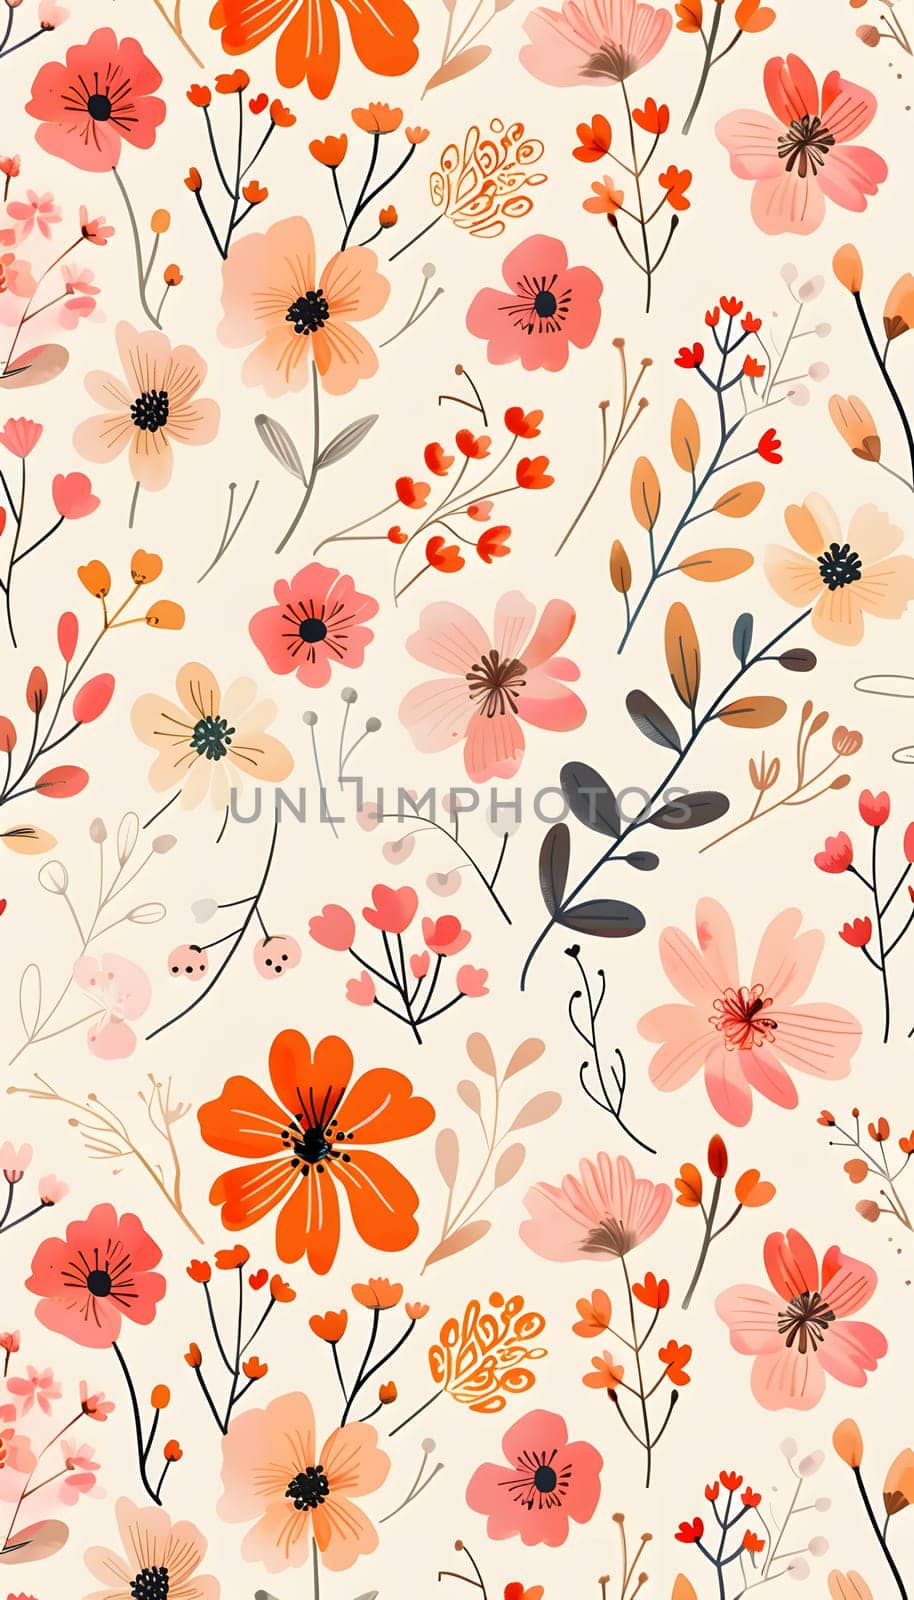 A creative textile motif showcasing a seamless pattern of pink and orange flowers on a white background. This art piece beautifully combines the vibrant colors of nature into a stunning design